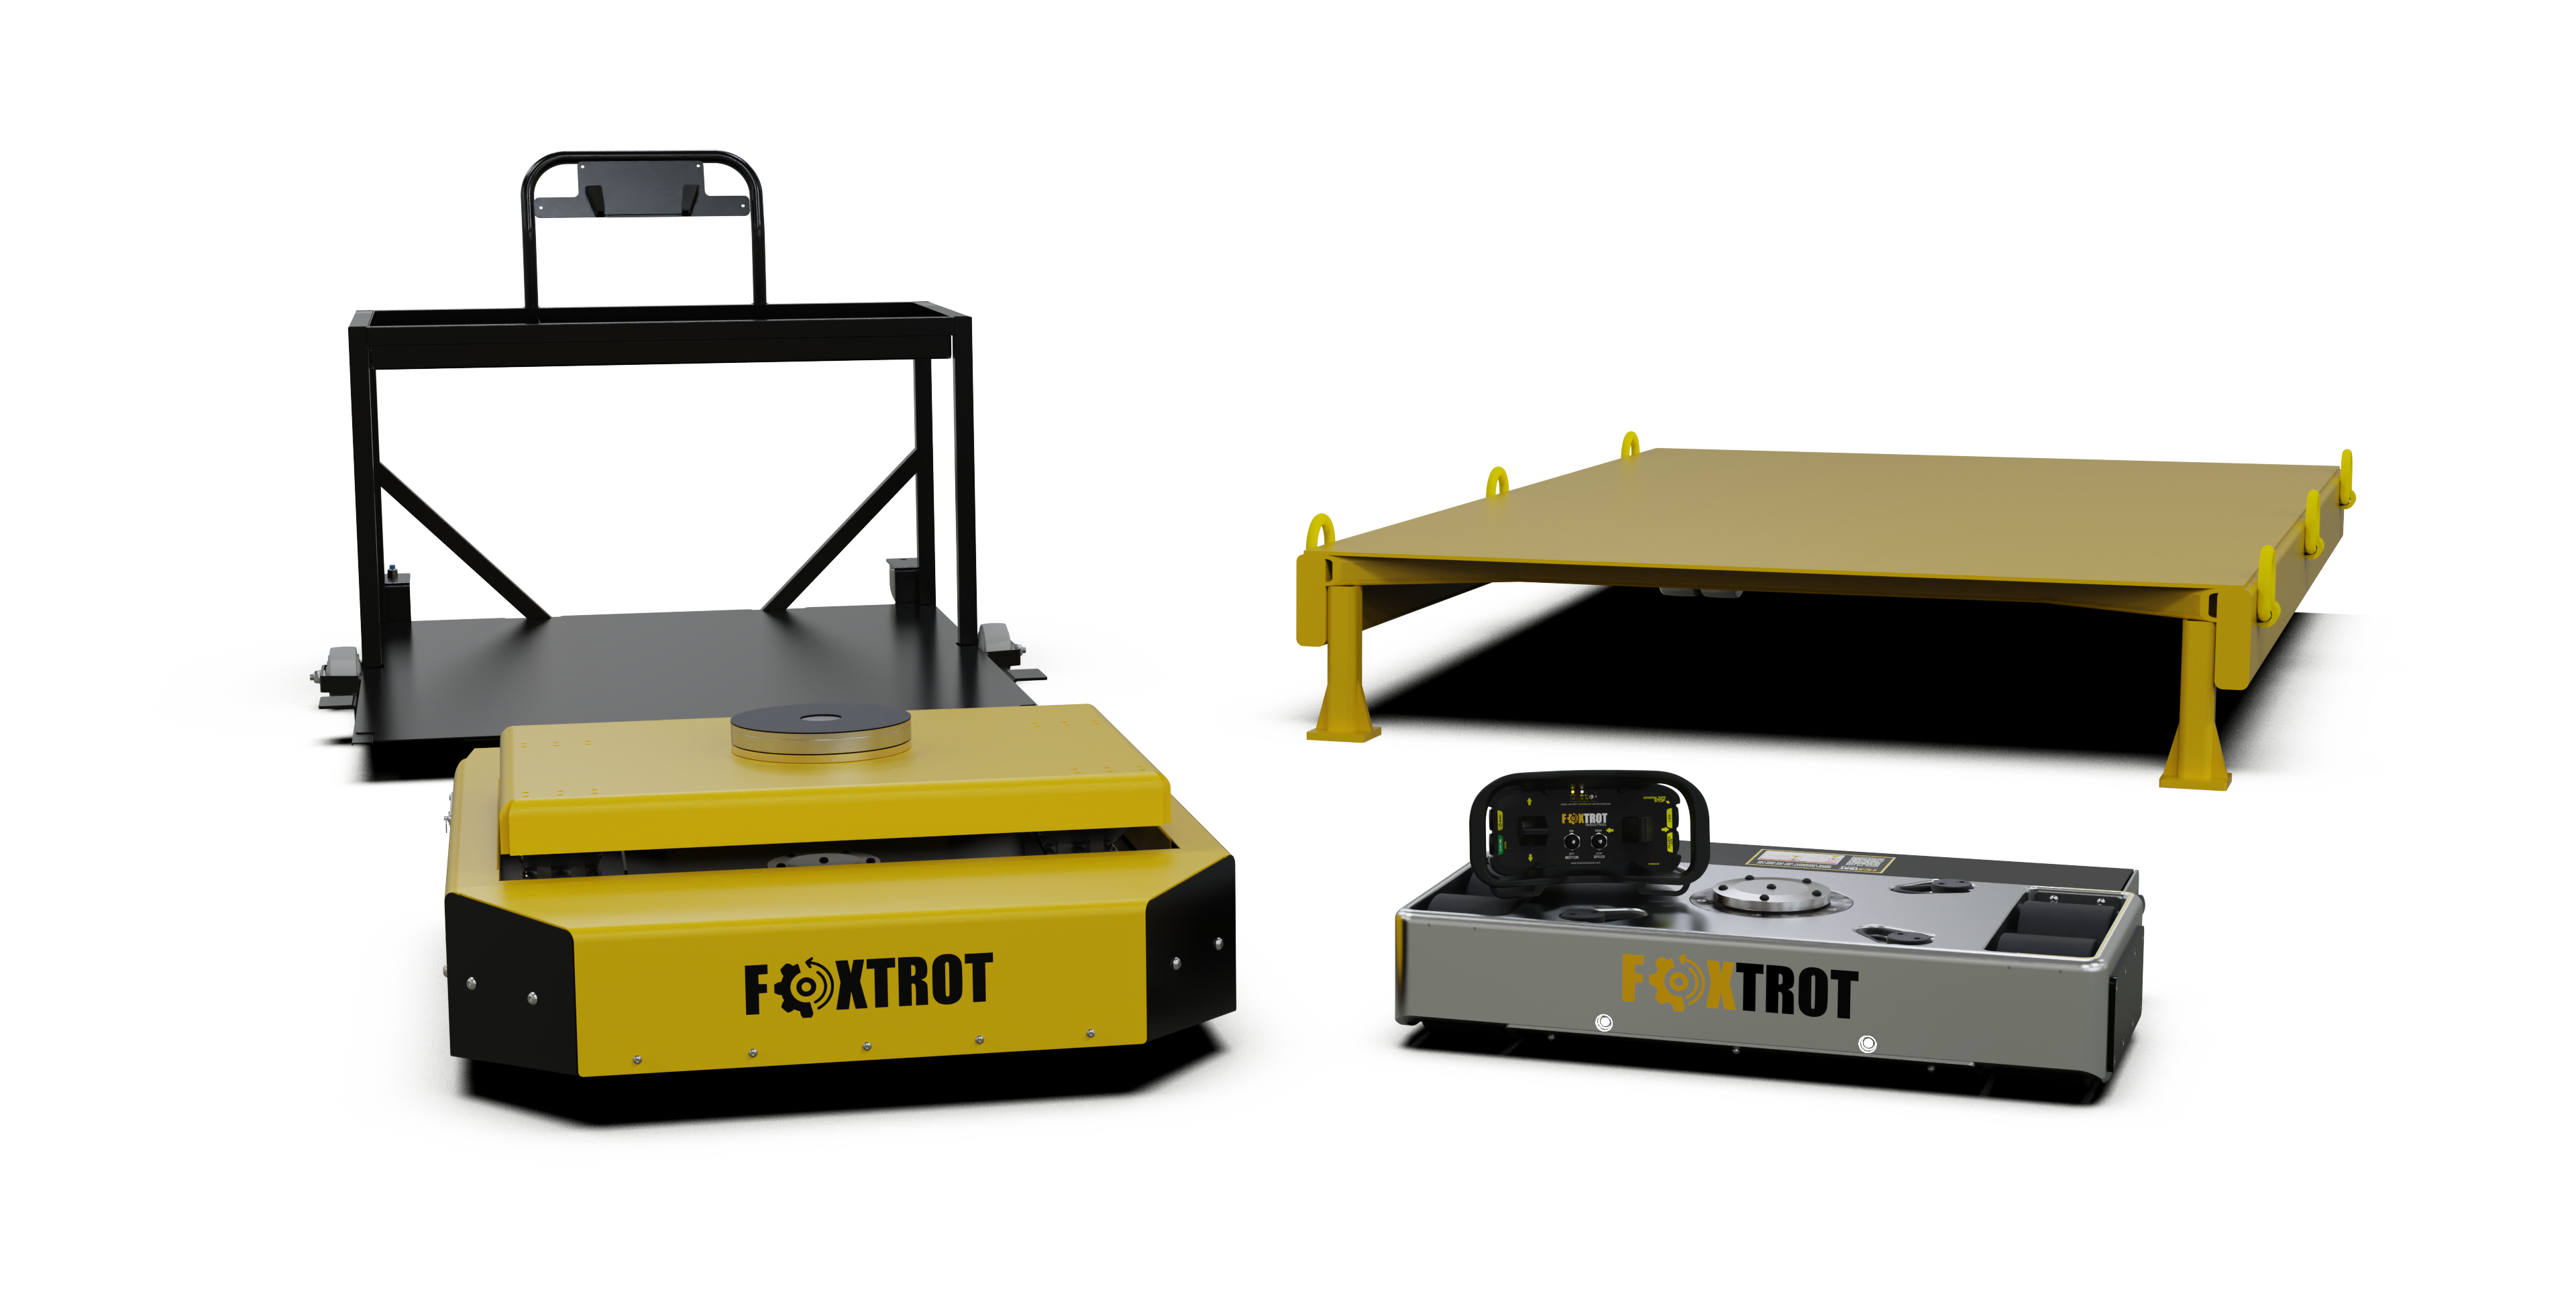 Renders manufacturing foxtrot products